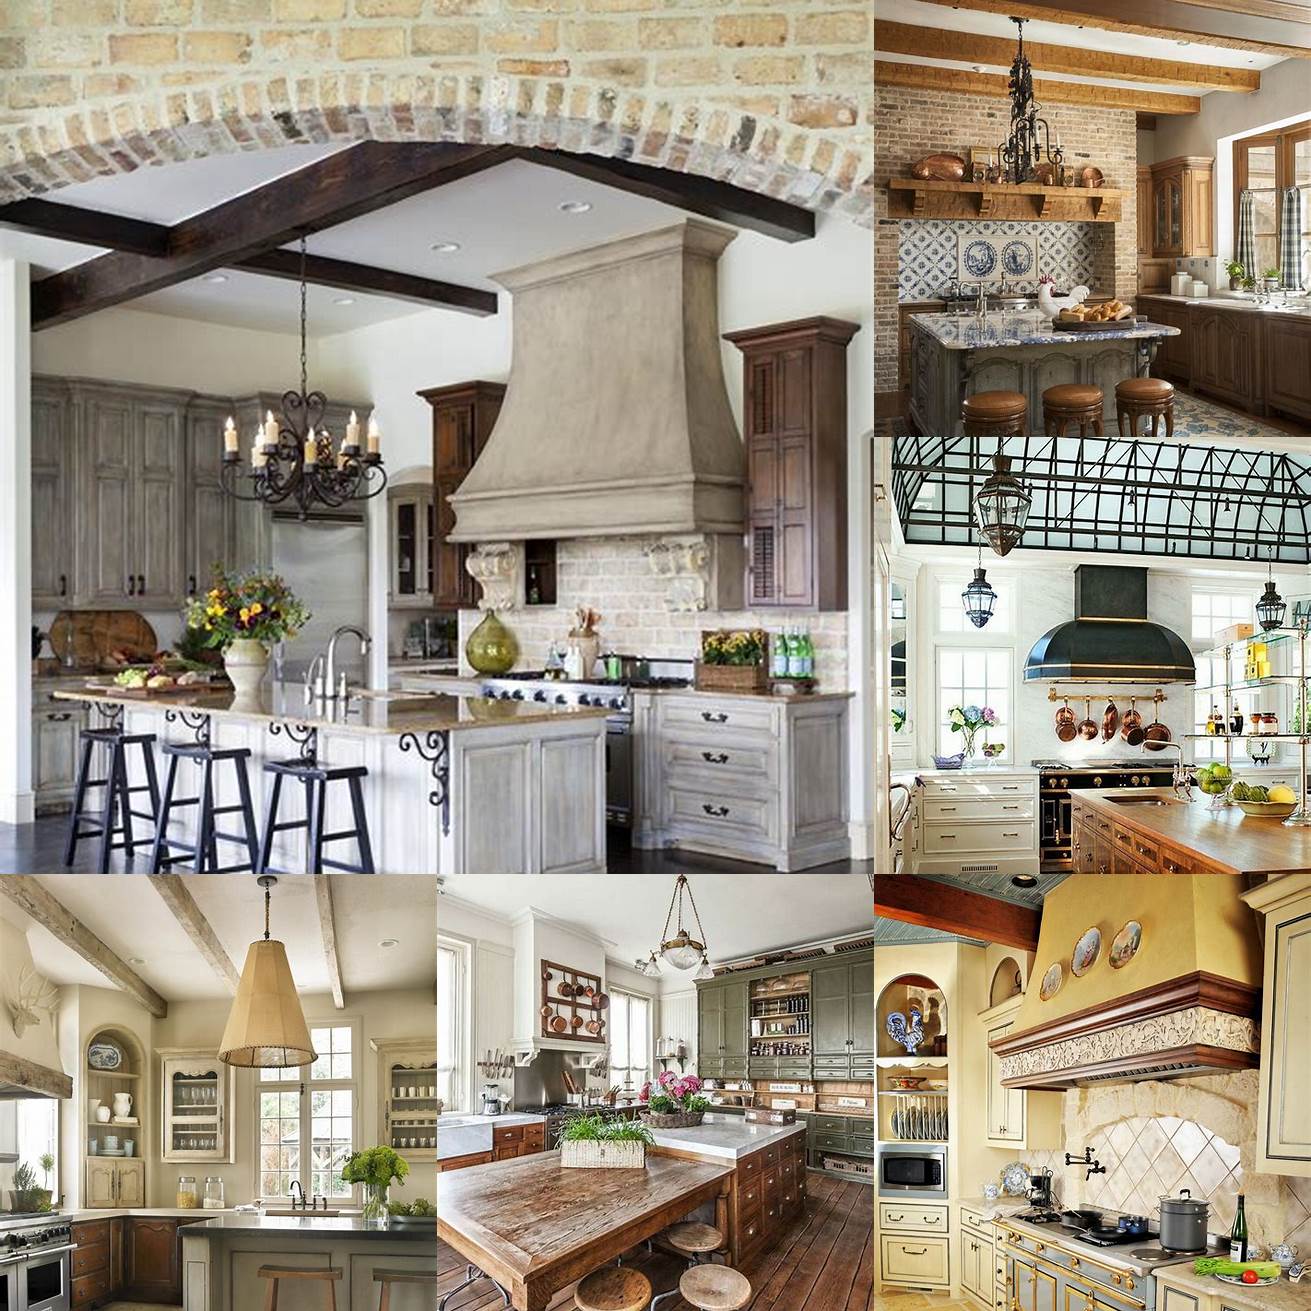 French country-style kitchen with a mix of vintage and modern elements The distressed wood flooring and furniture paired with the sleek and modern appliances create a unique and eclectic look